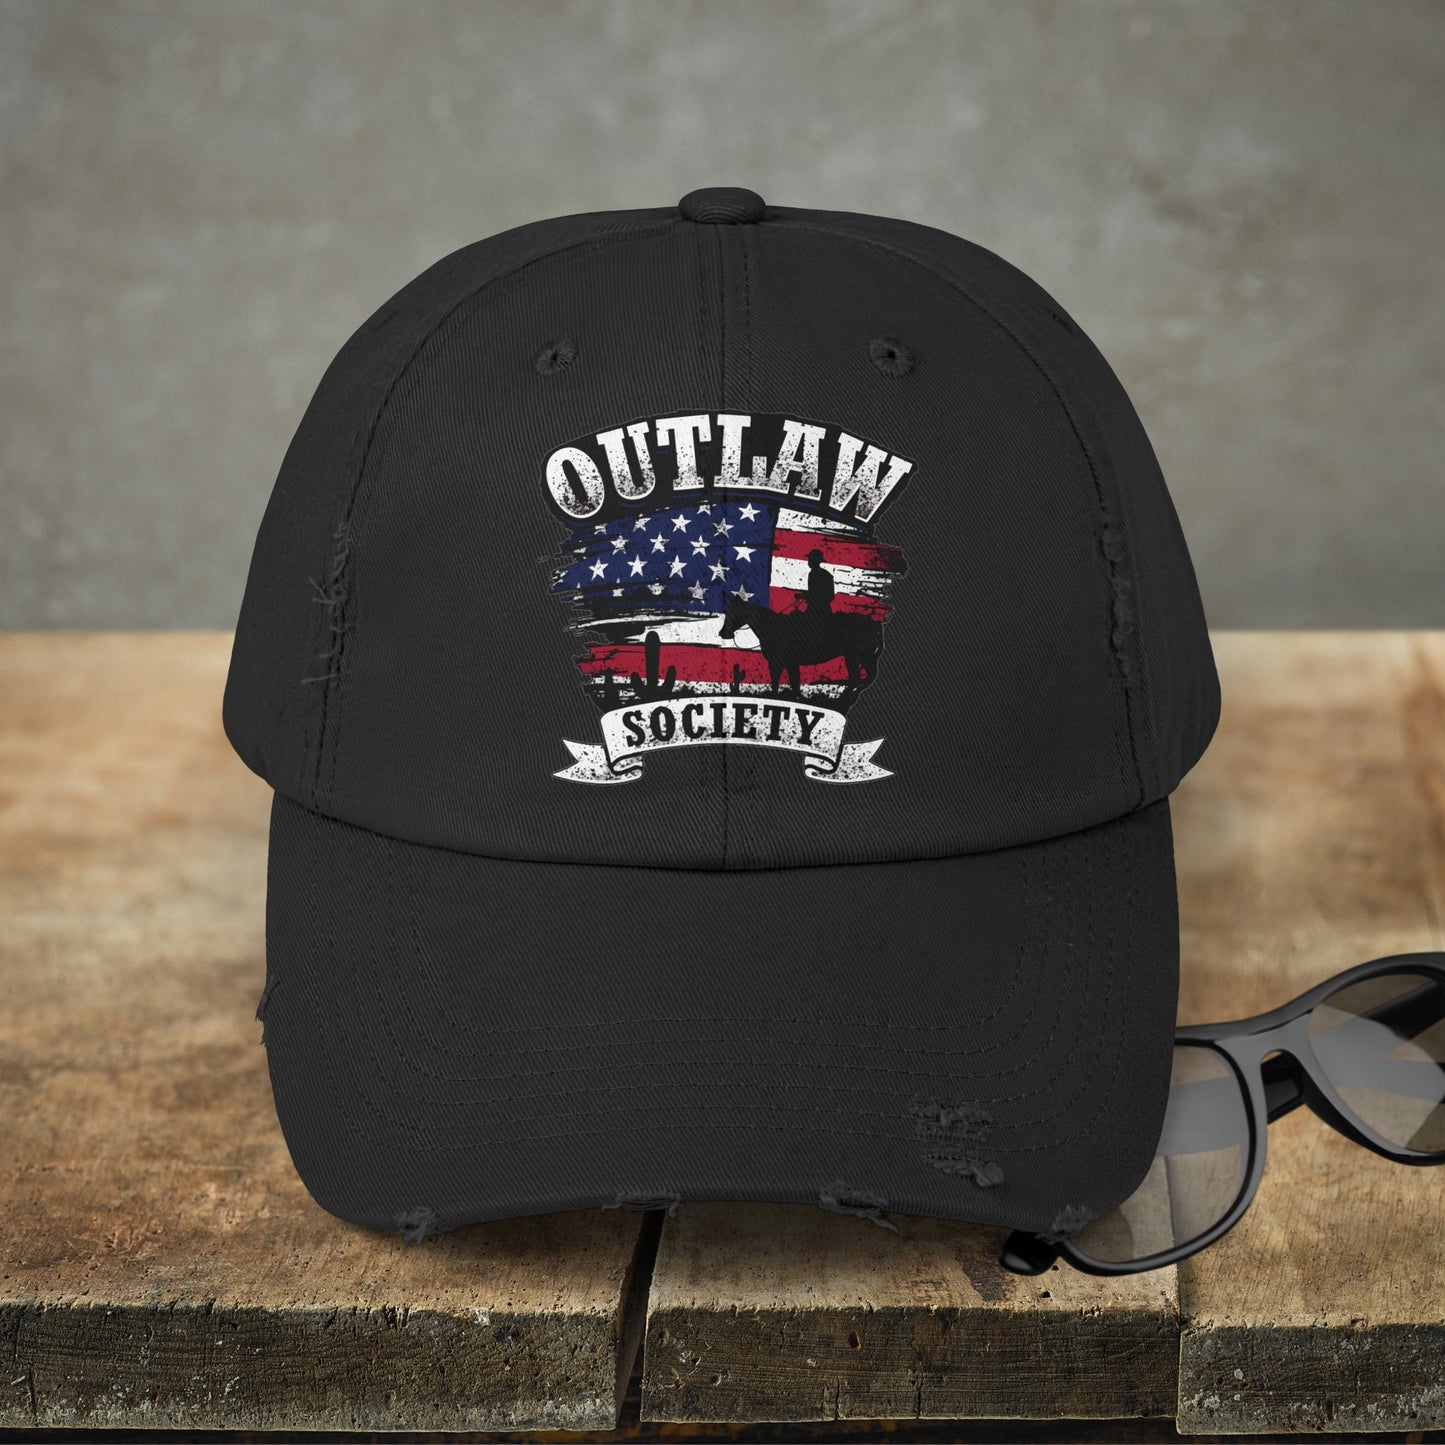 Outlaw Country Music Baseball Cap, Outlaw Society Hat, Country Music Concert - FlooredByArt